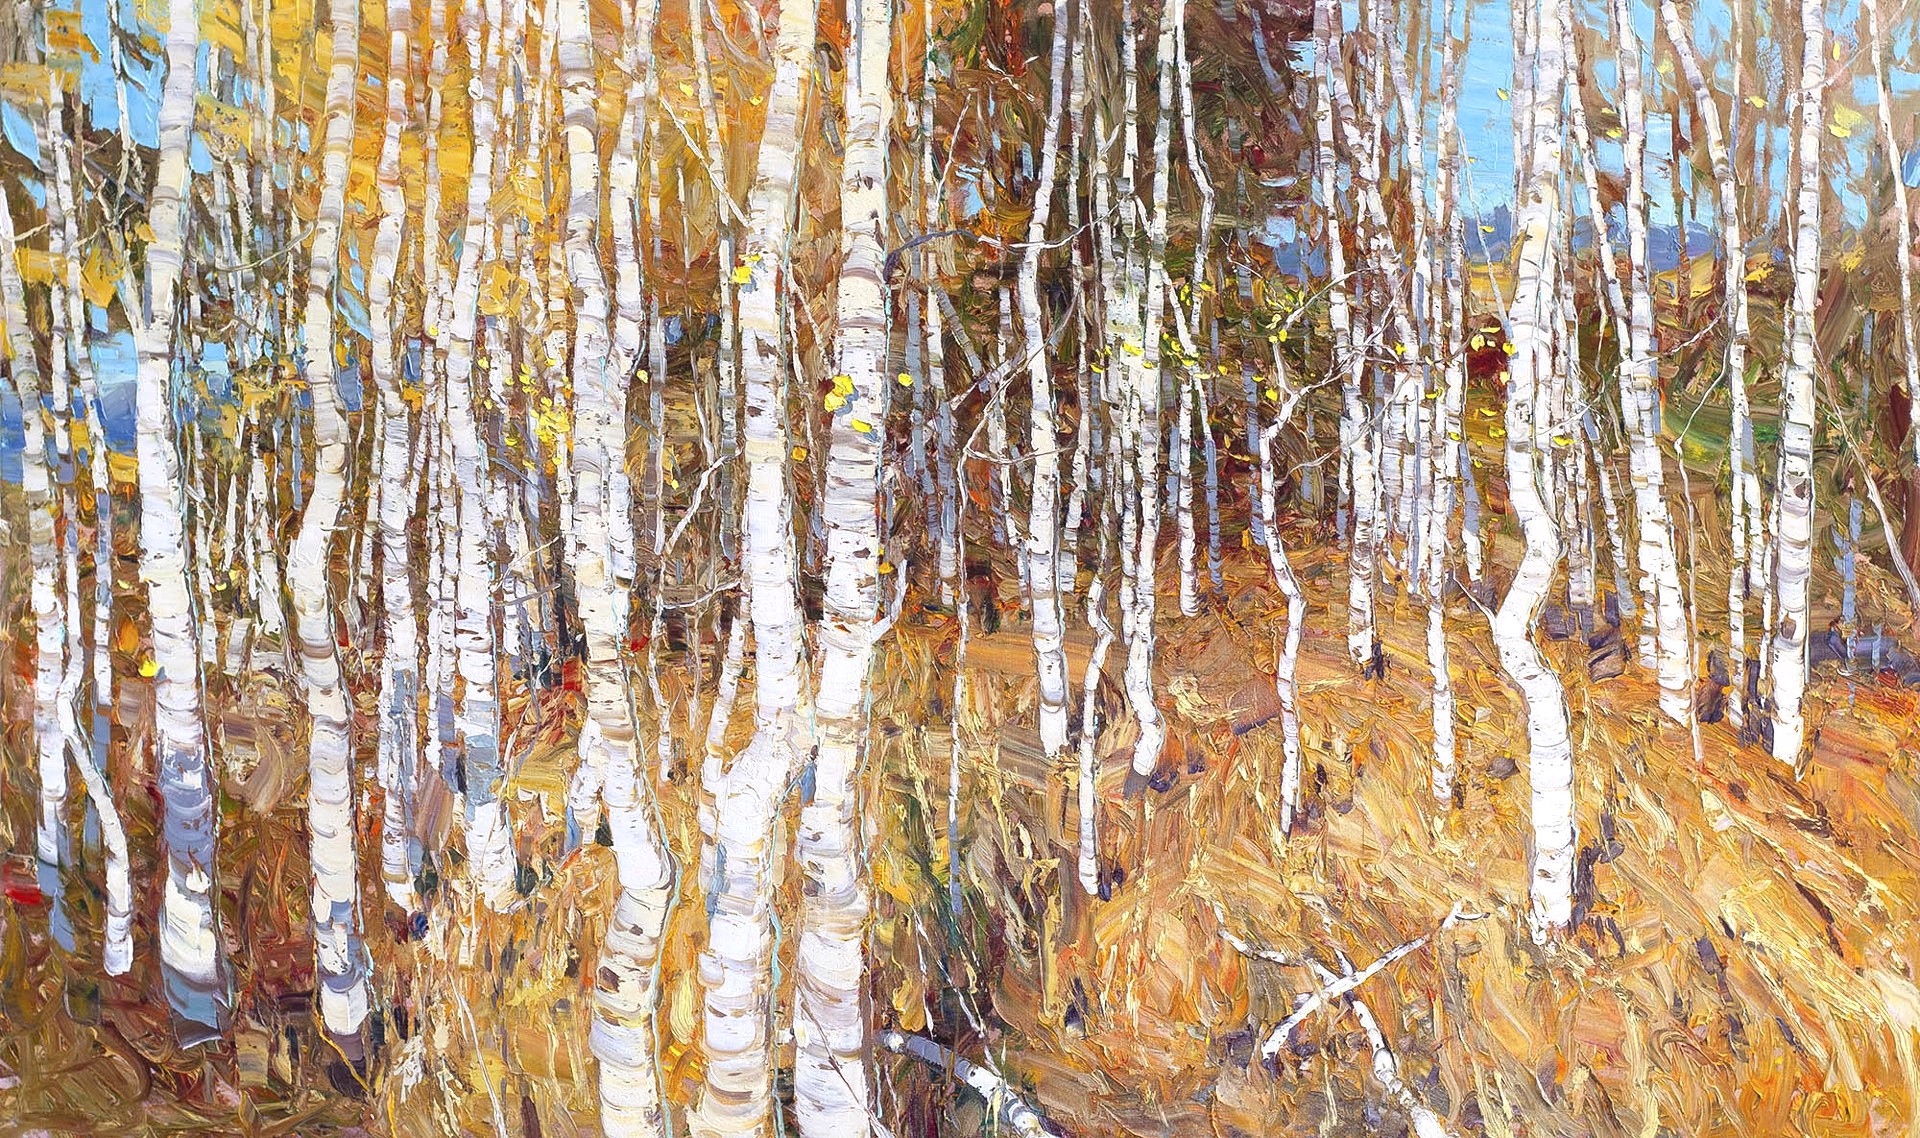 Original Oil Painting Featuring Dense Fall Aspen Trees With Blue Sky Peaking Through Tree Trunks